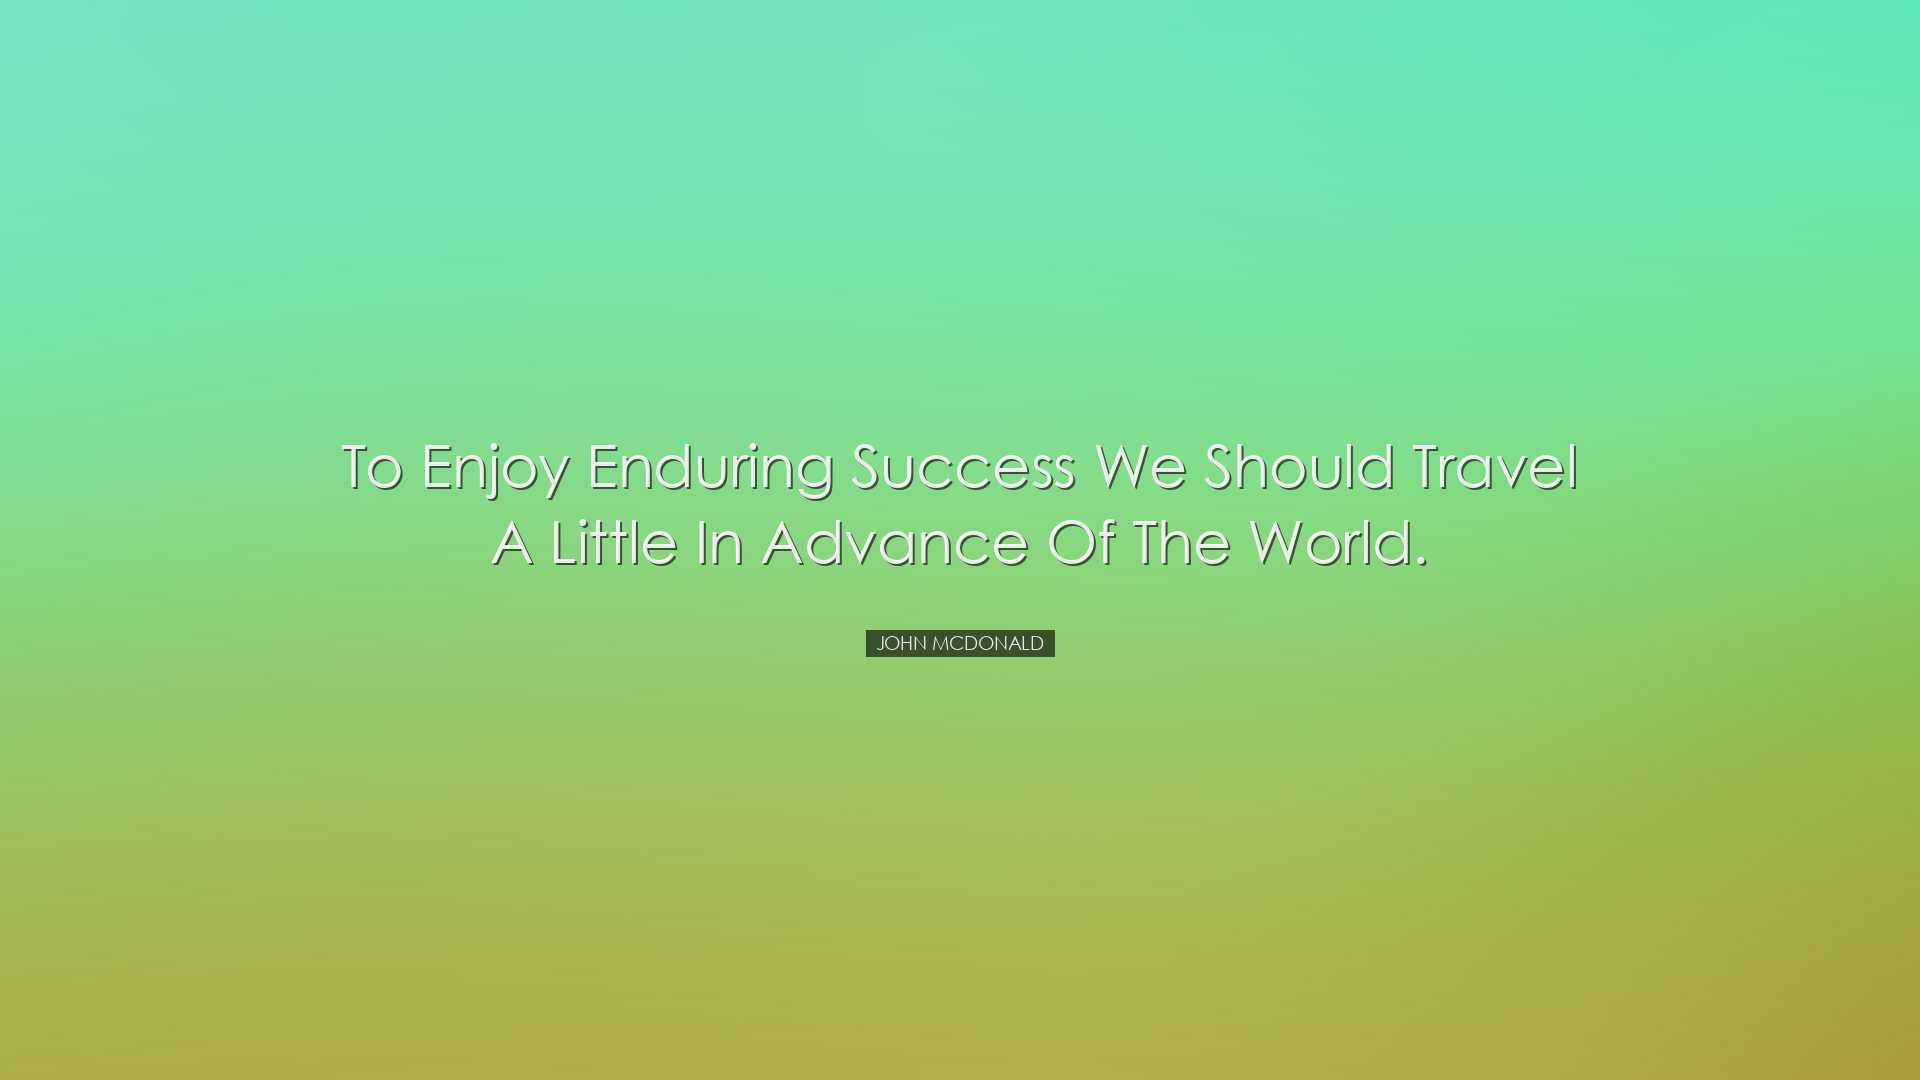 To enjoy enduring success we should travel a little in advance of